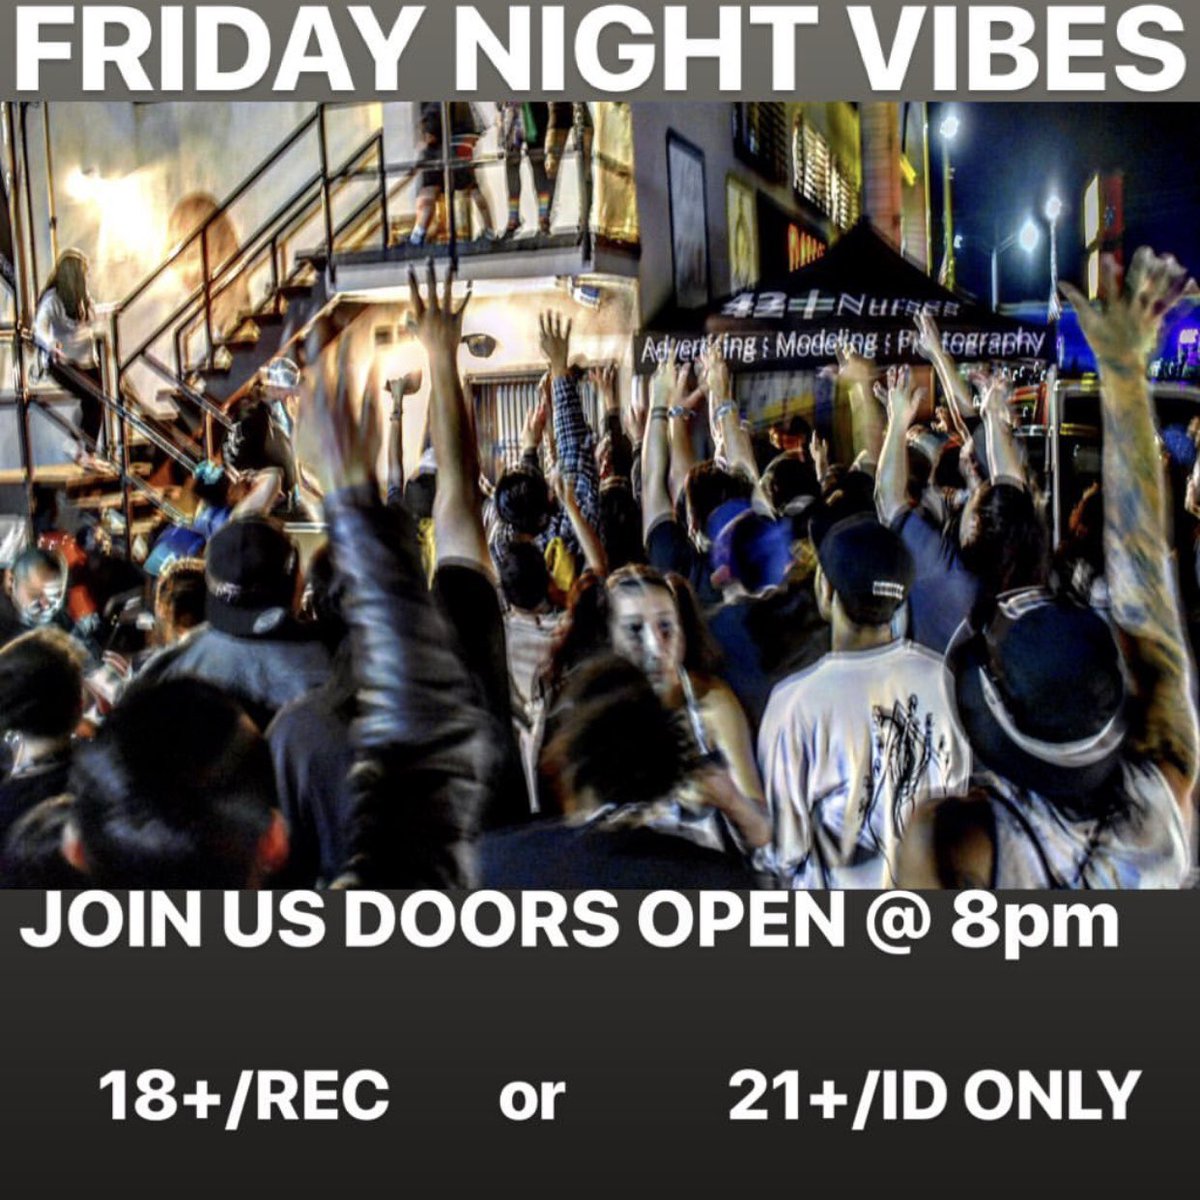 We’re back tonight at our original spot in Canoga Park Dm for more info Exclusive Top Shelf Vendors tonight w the best deals in the 818/213/661/805  #FridayNightSesh